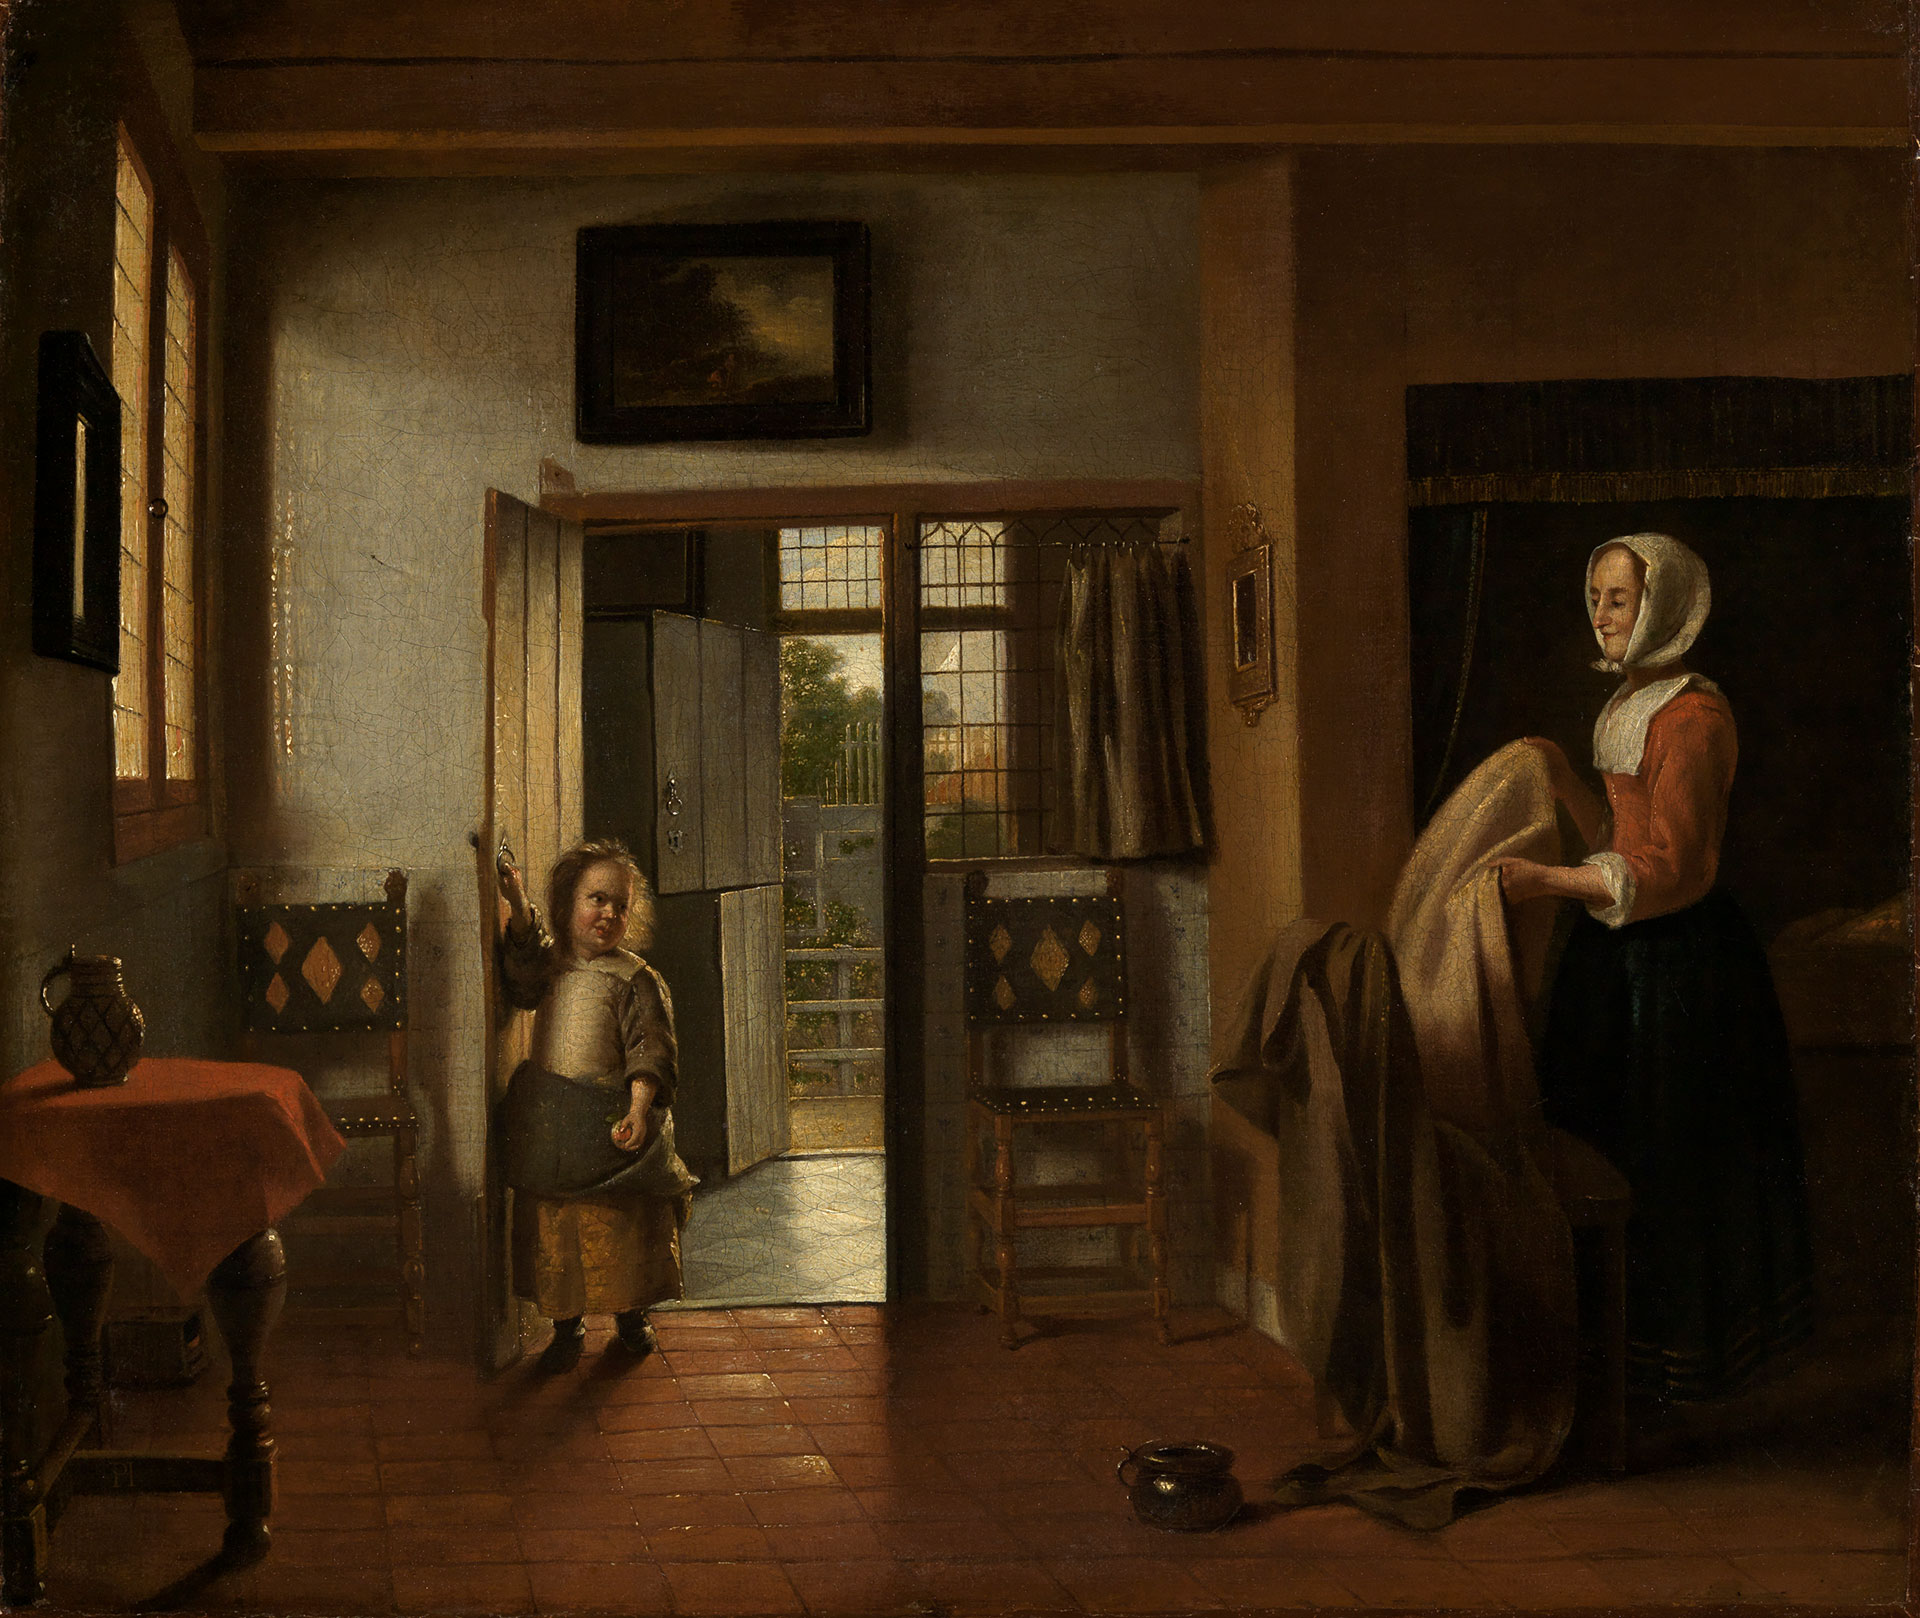 Illustration of the work "In the bedroom" by Pieter de Hooch, created around 1658 or 1660. You can see a child entering a room. A woman stands in the room and folds towels. The work of art is located in the Staatliche Kunsthalle Karlsruhe.